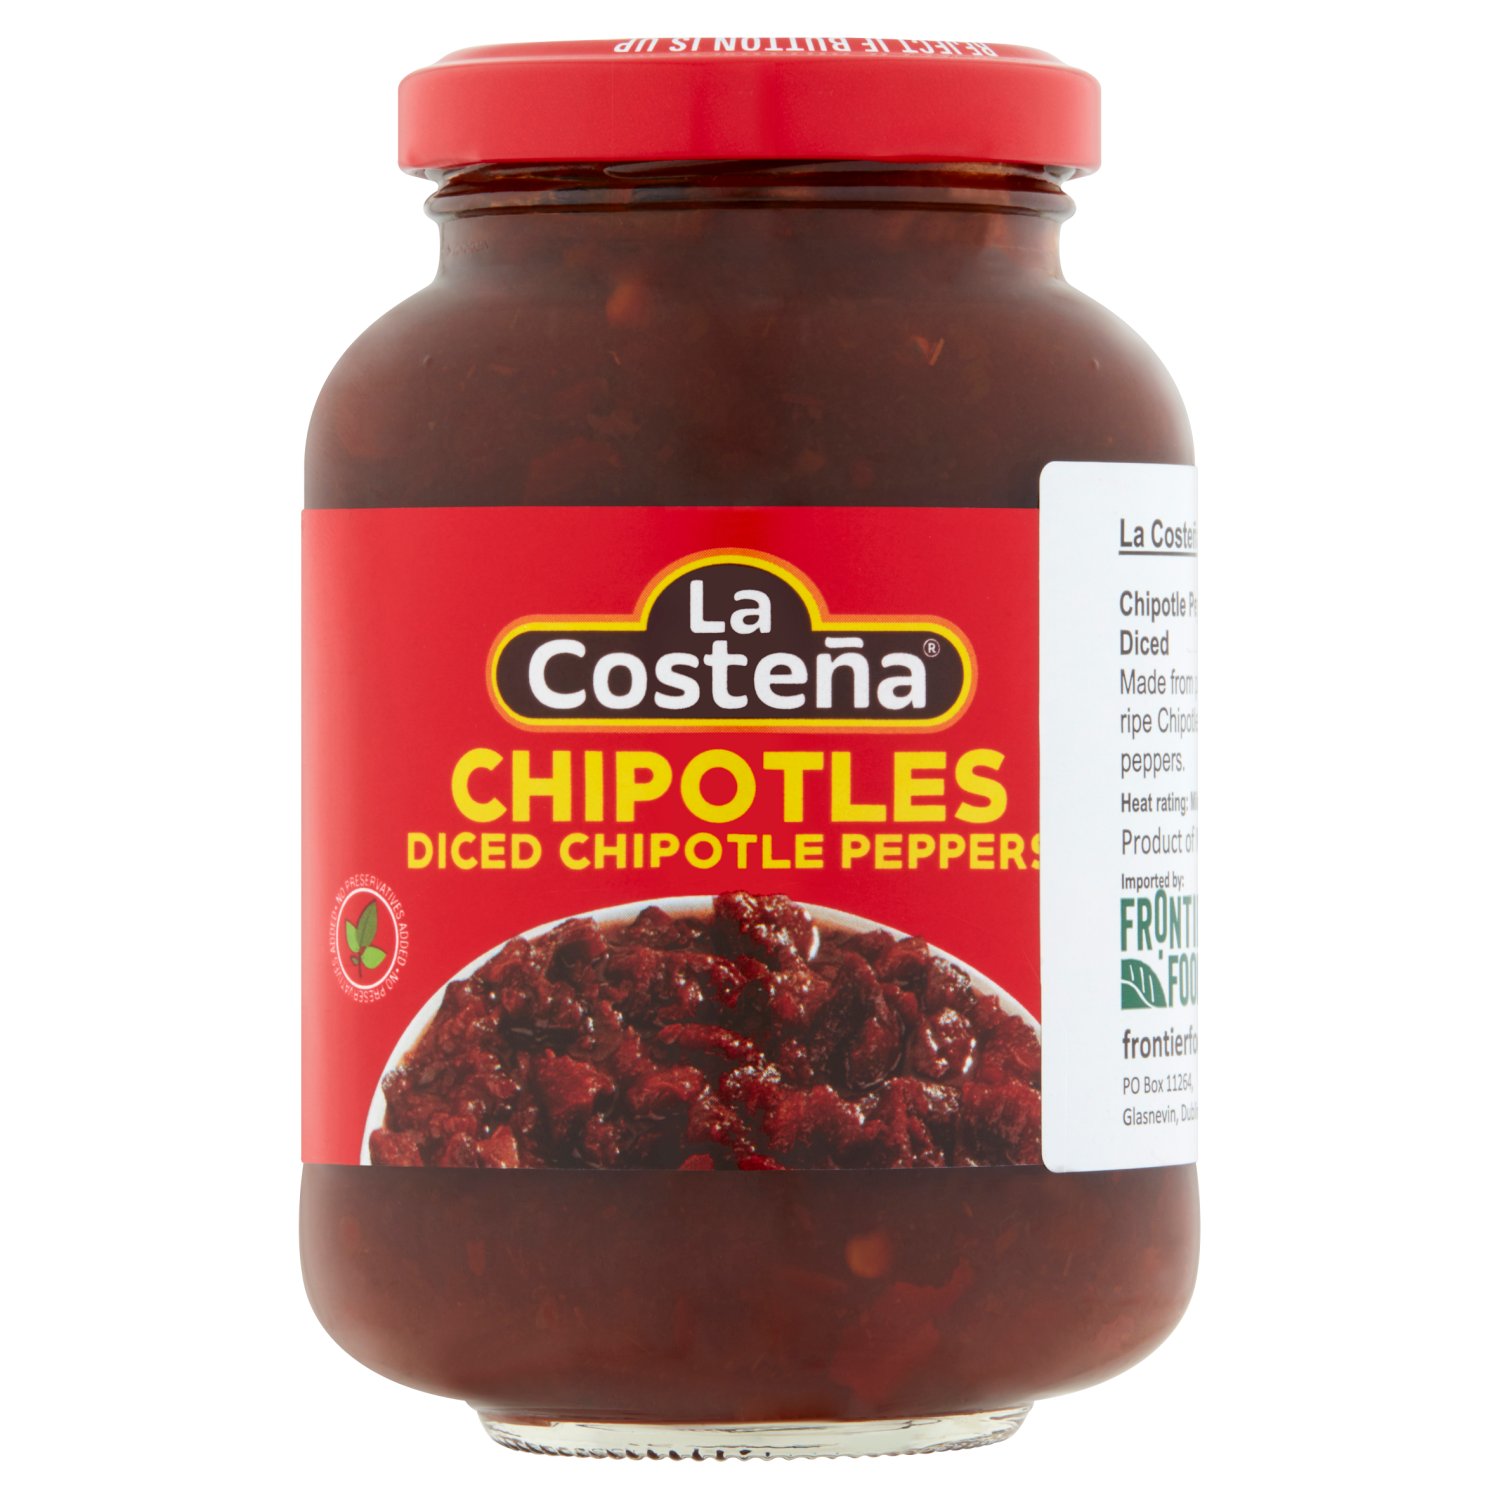 La Costeña Diced Chipotle Peppers (230 g)